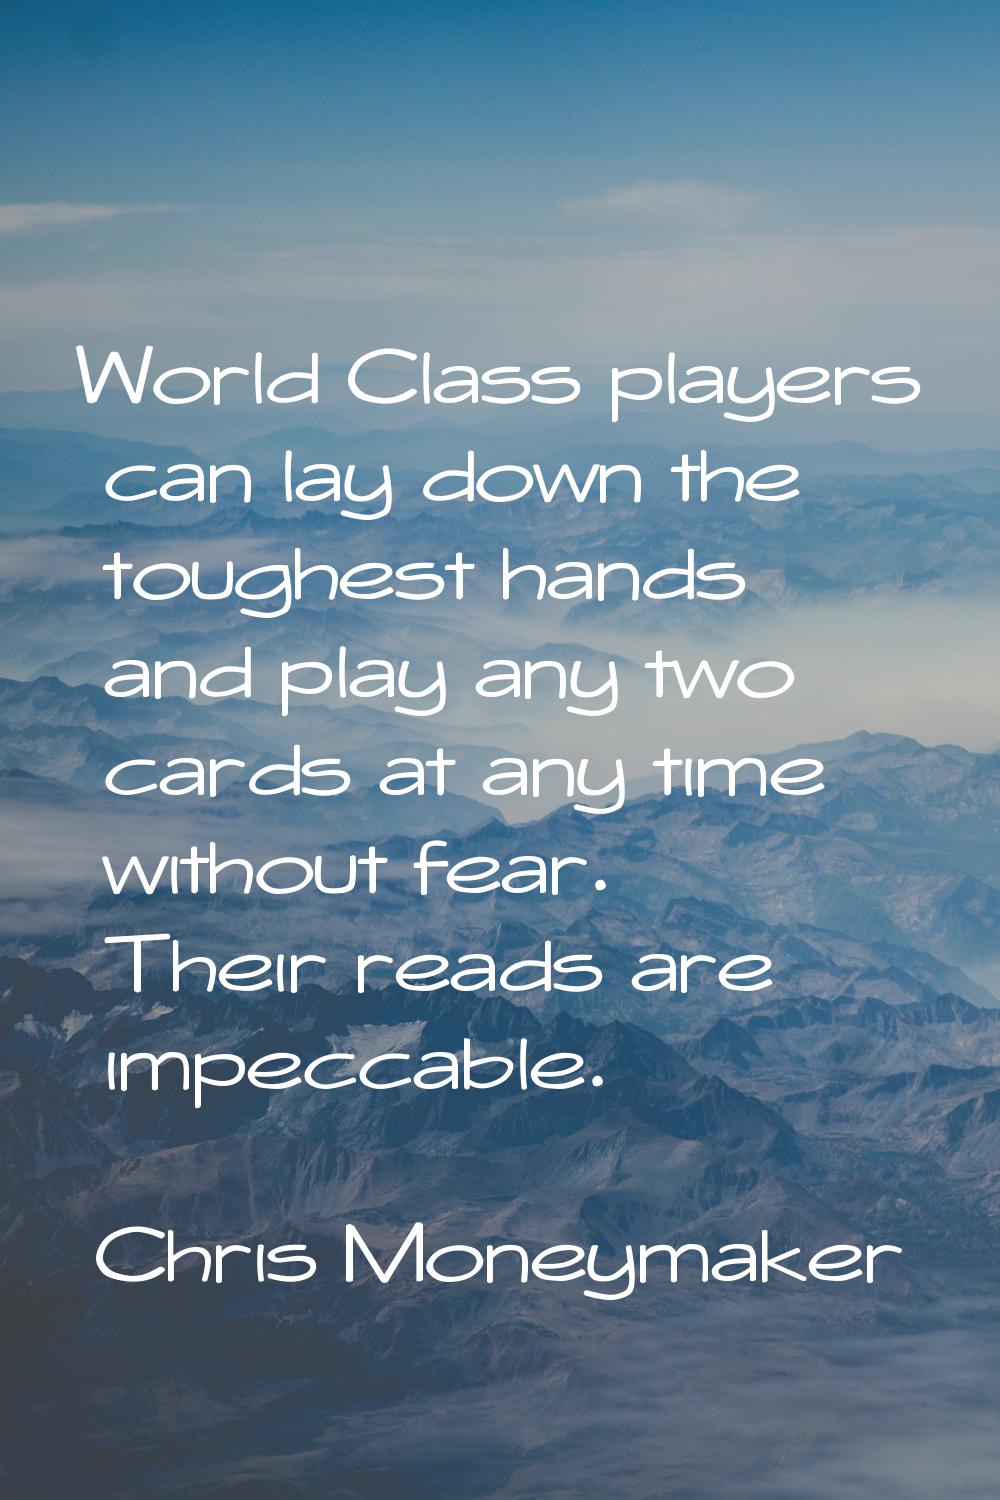 World Class players can lay down the toughest hands and play any two cards at any time without fear